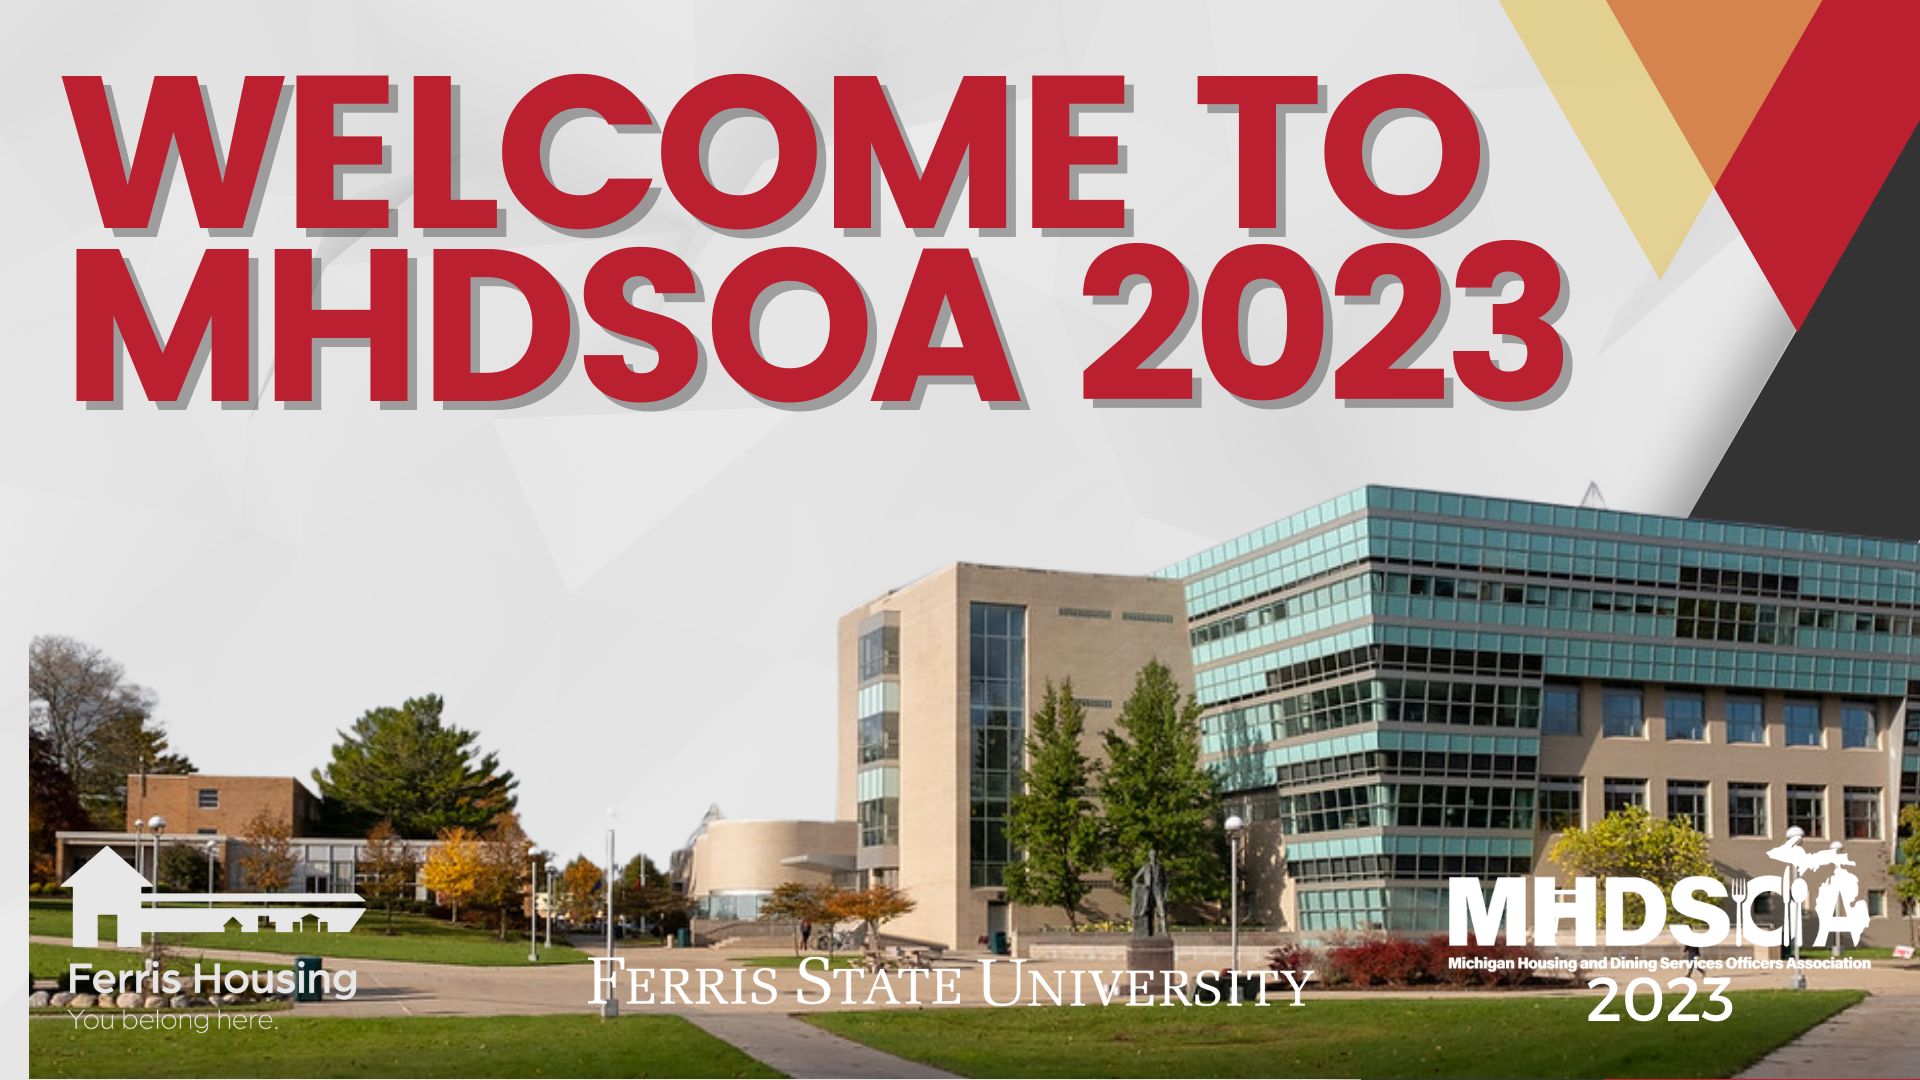 Welcome to MHDSOA with MHDSOA 2023 logo, FLITE Library at the back, Ferris State University Logo on the middle, and Ferris State Housing logo on the left side